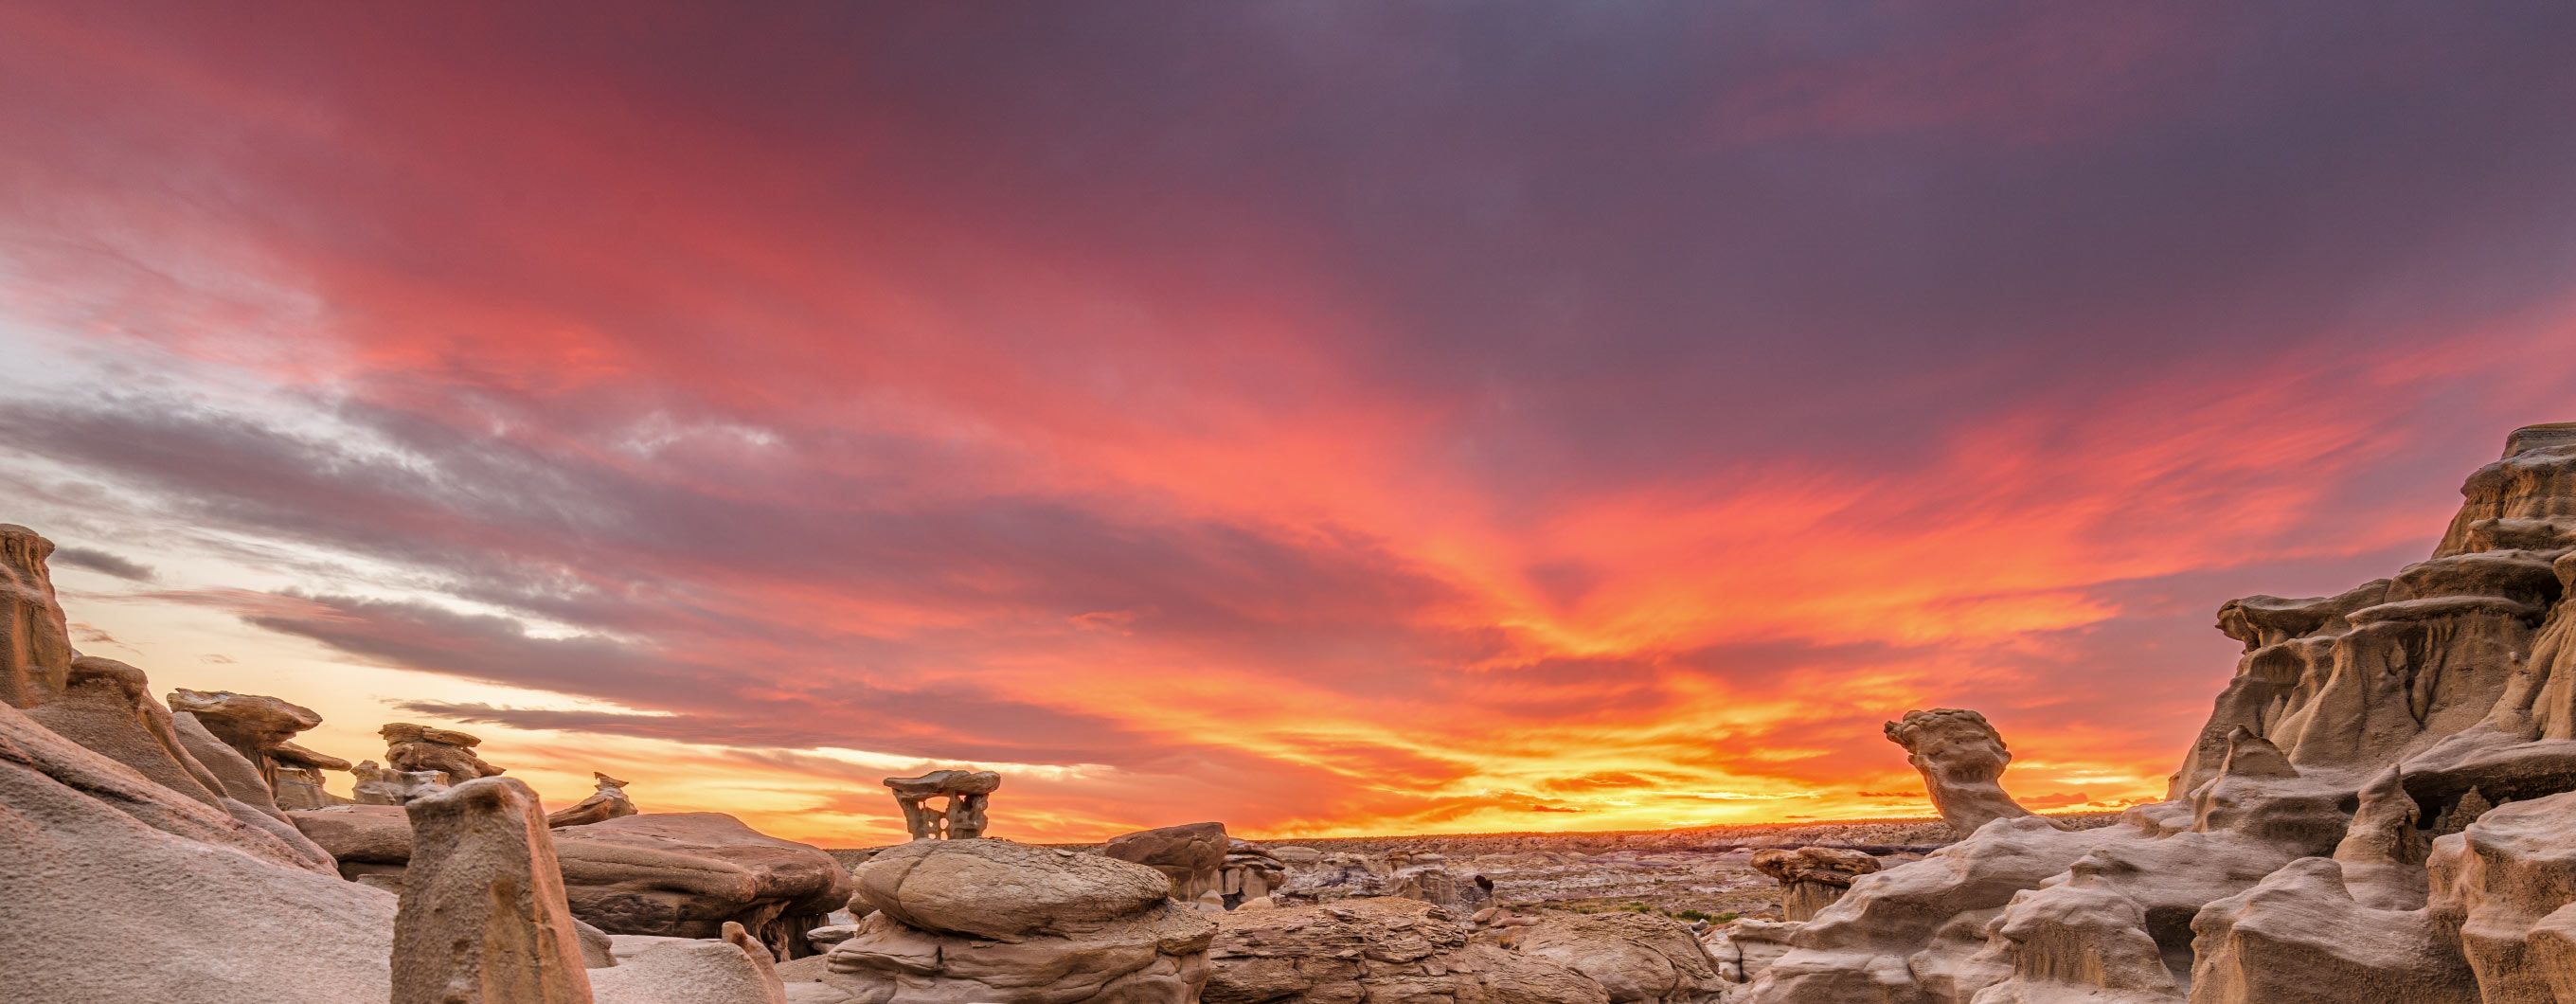 Image of a rocky landscape in New Mexico with a cloudy sky and a setting sun